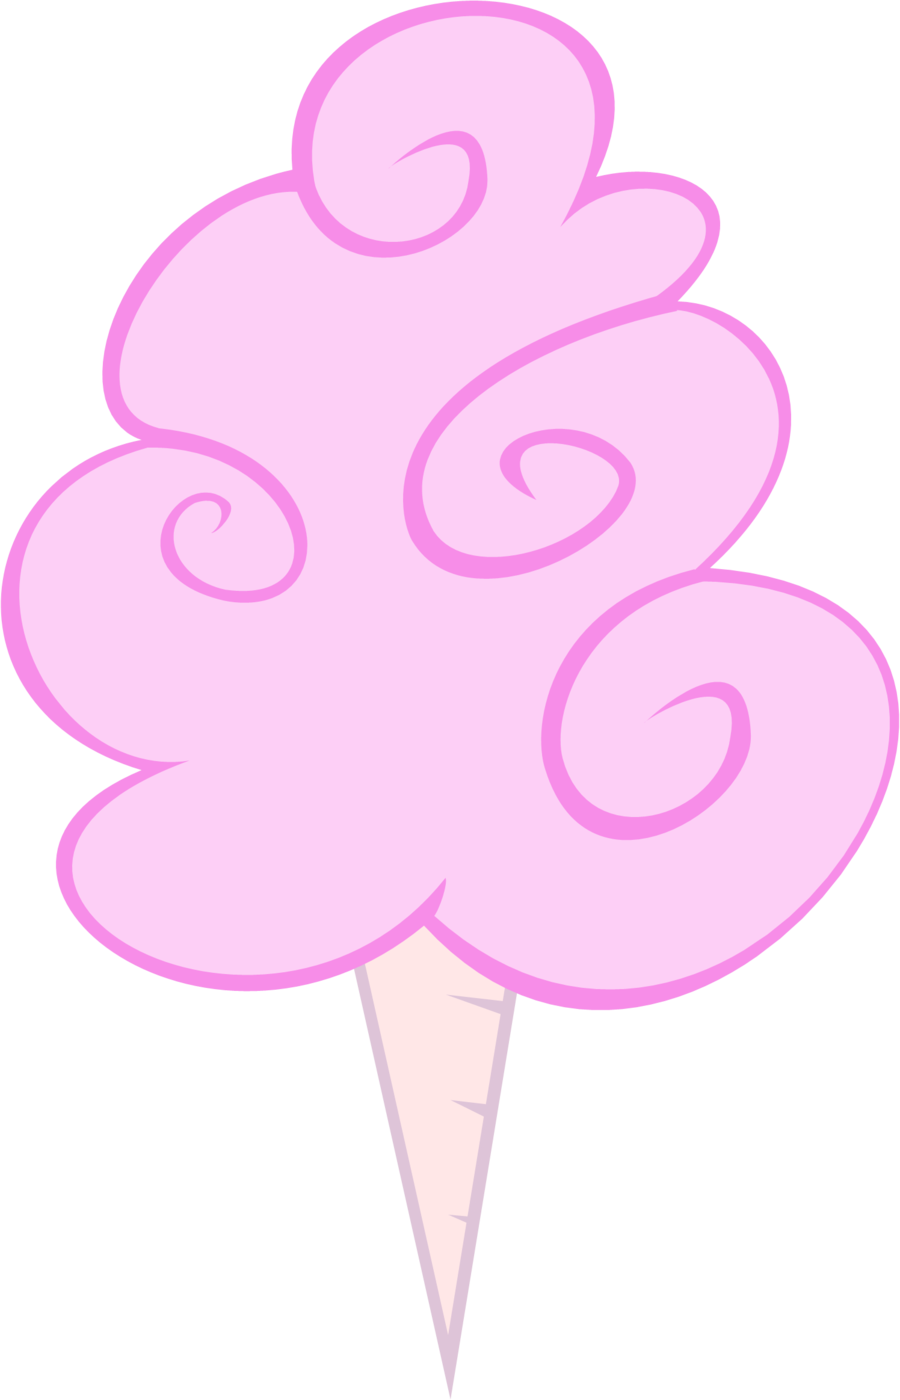 Cotton Candy By Chessie2003-d3k1unt - Mlp Cotton Candy Cutie Mark (900x1400), Png Download